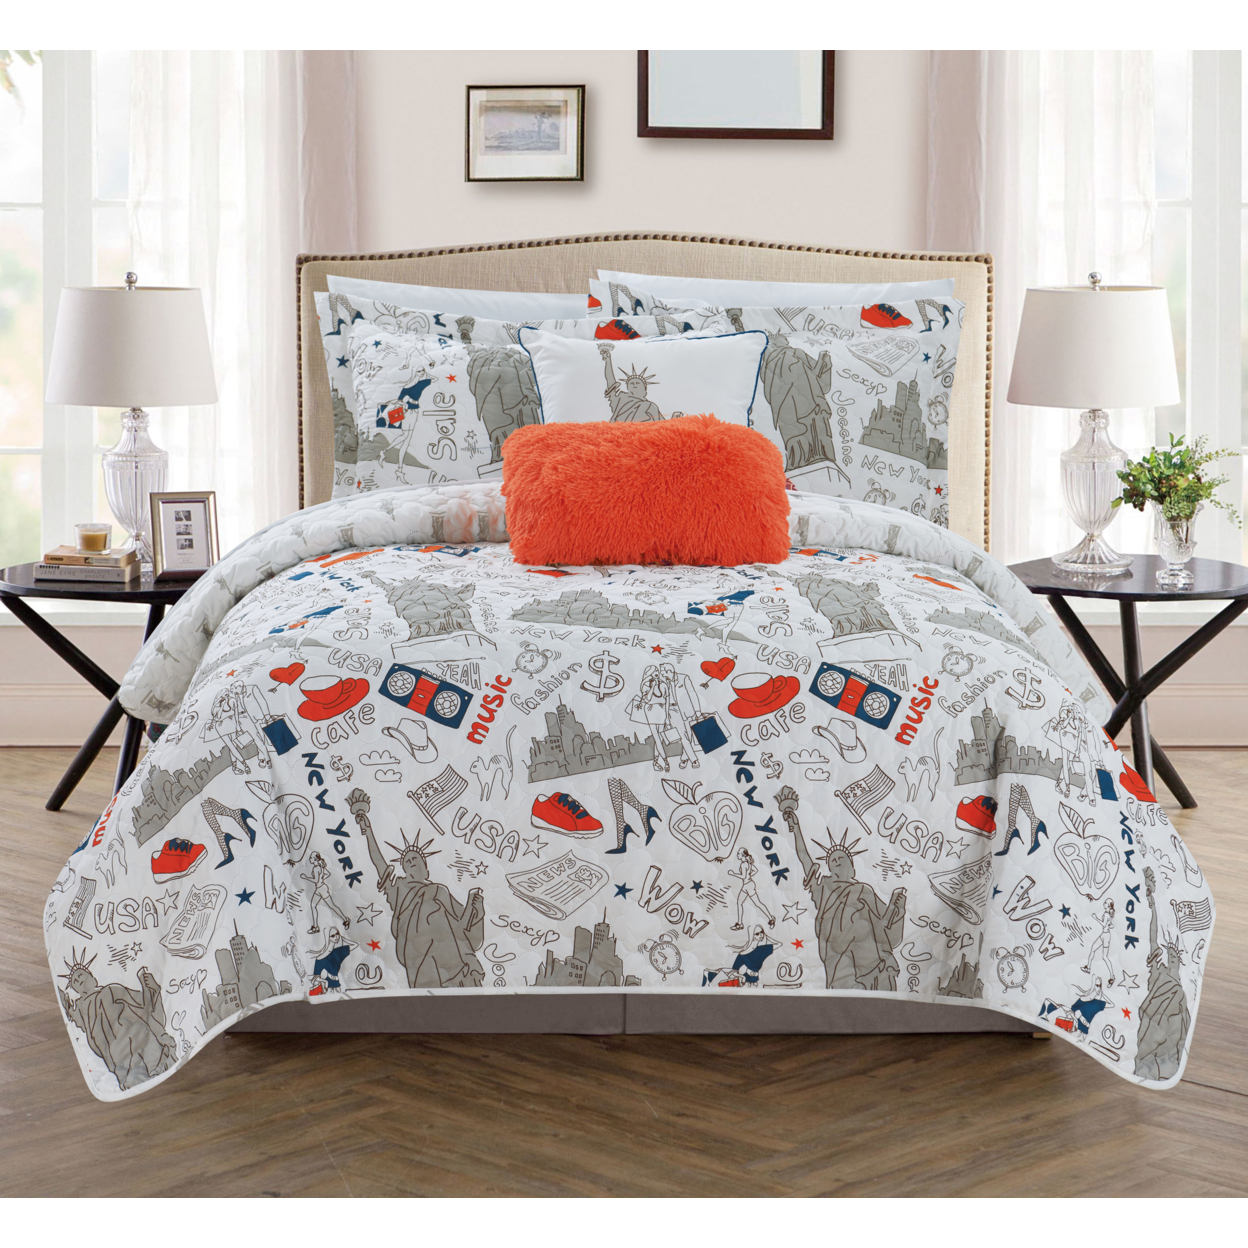 Bay Park 5 Or 4 Piece Reversible Quilt Set Bay Park City Inspired Printed Design Coverlet Bedding - Navy, Twin